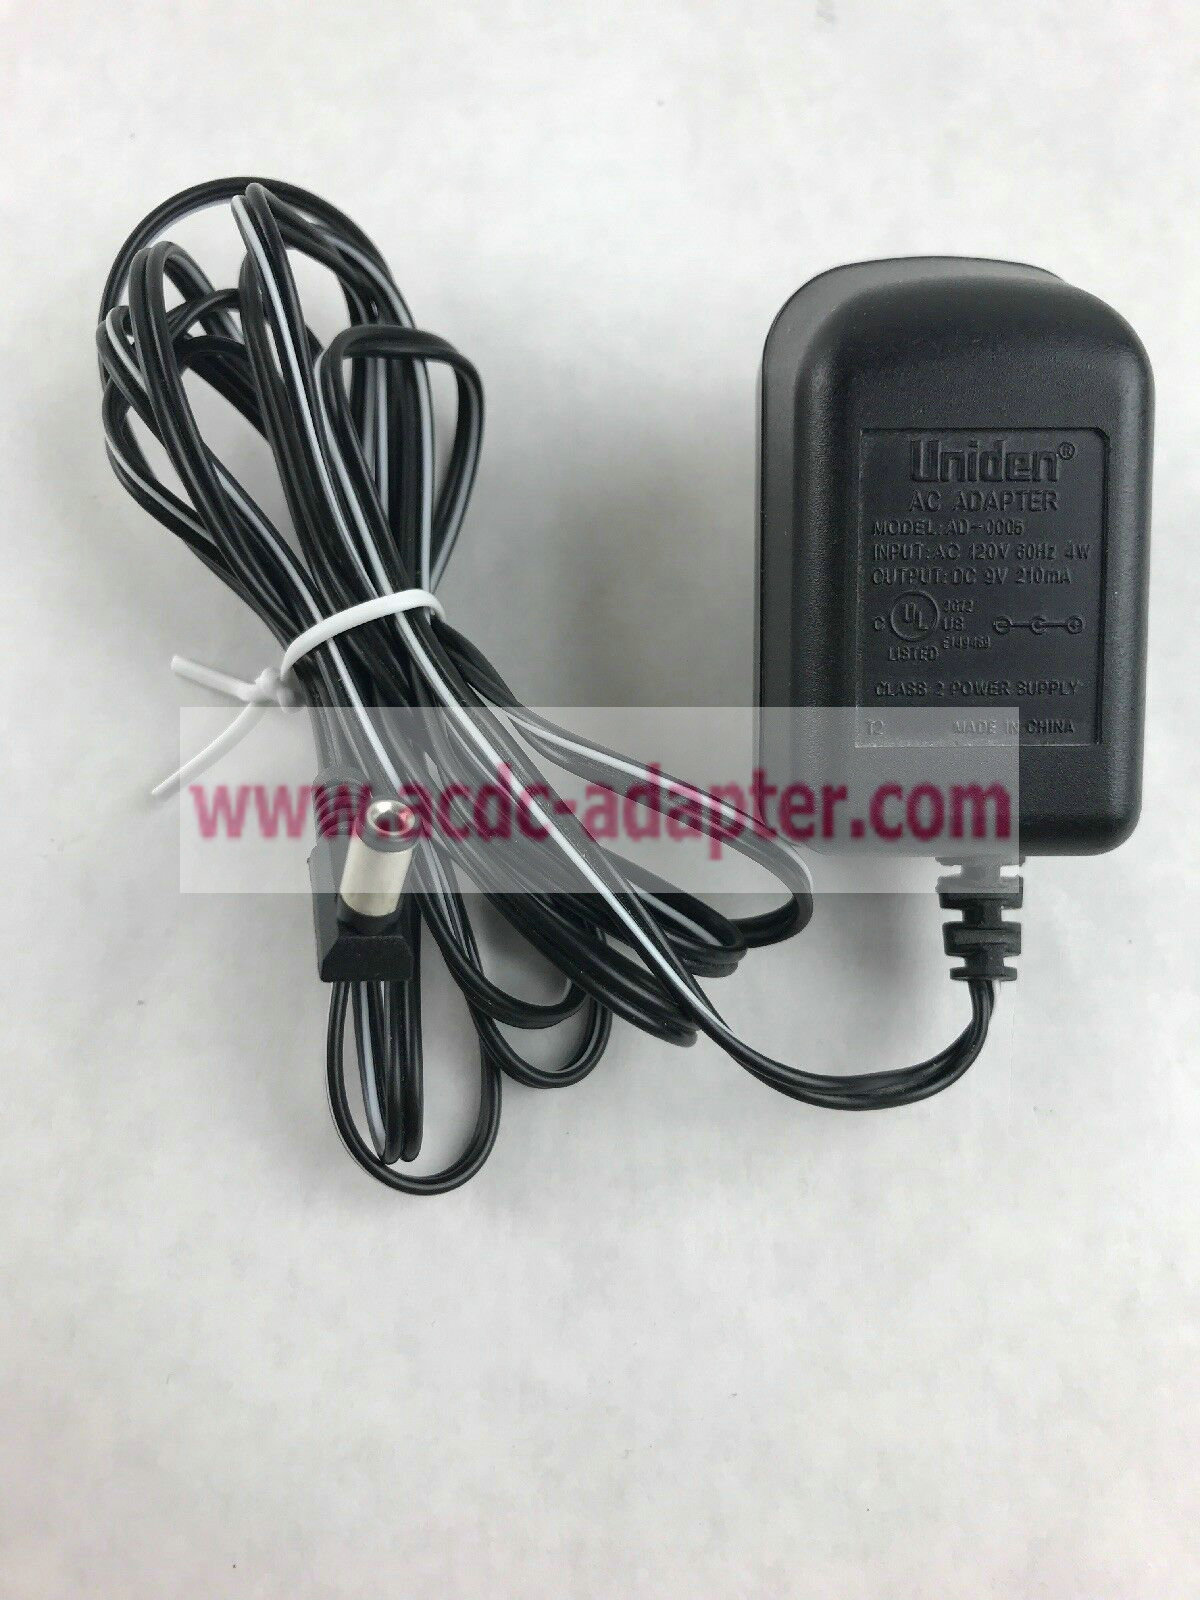 New Uniden AC Adapter AD-0005 9V 210mA Power Supply